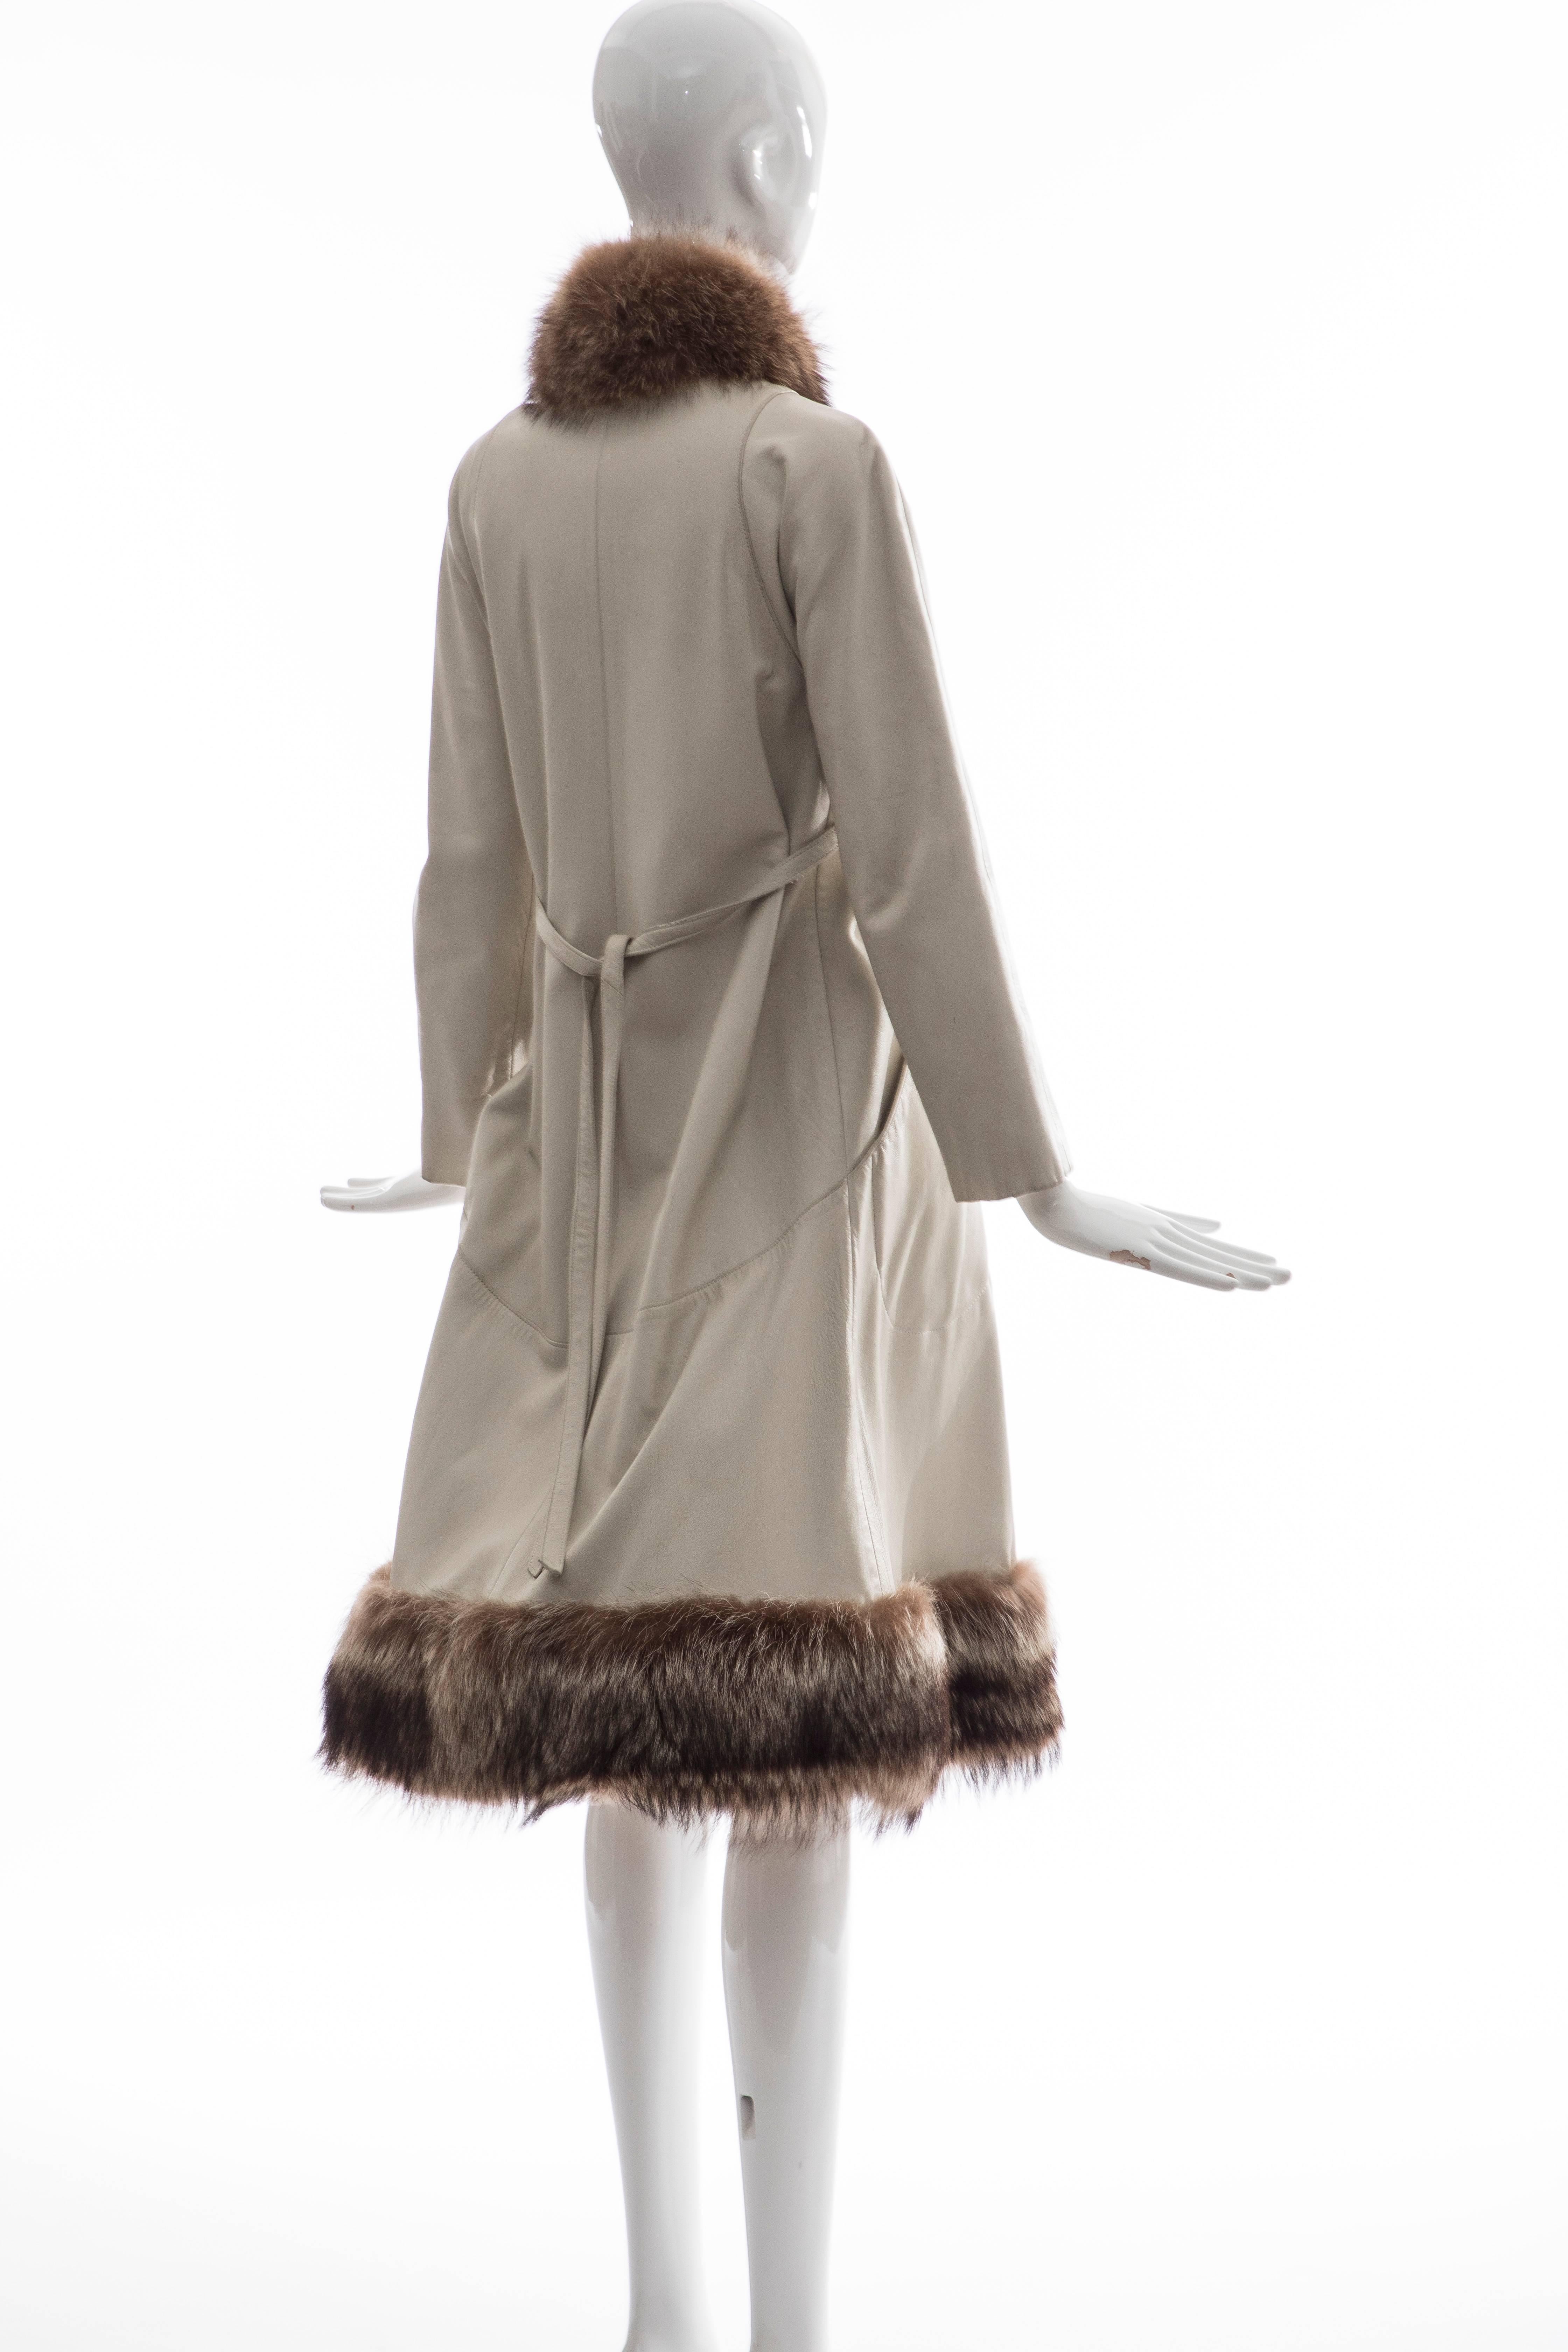 Bonnie Cashin For Sills Leather Coat With Fur Trim, Circa 1960s For Sale 3